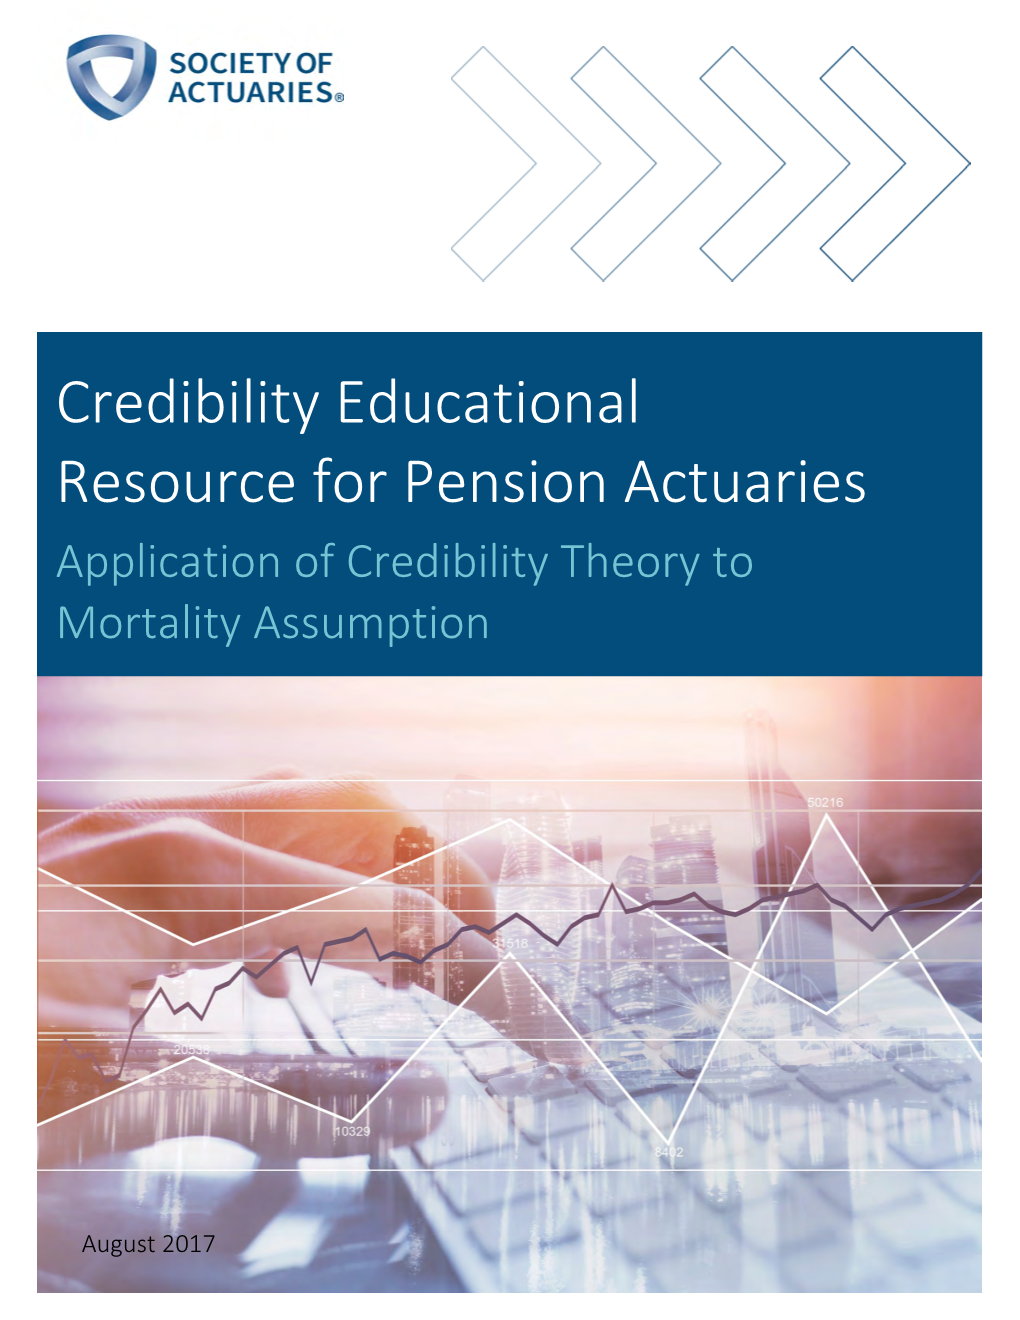 Credibility Educational Resource for Pension Actuaries Application of Credibility Theory to Mortality Assumption